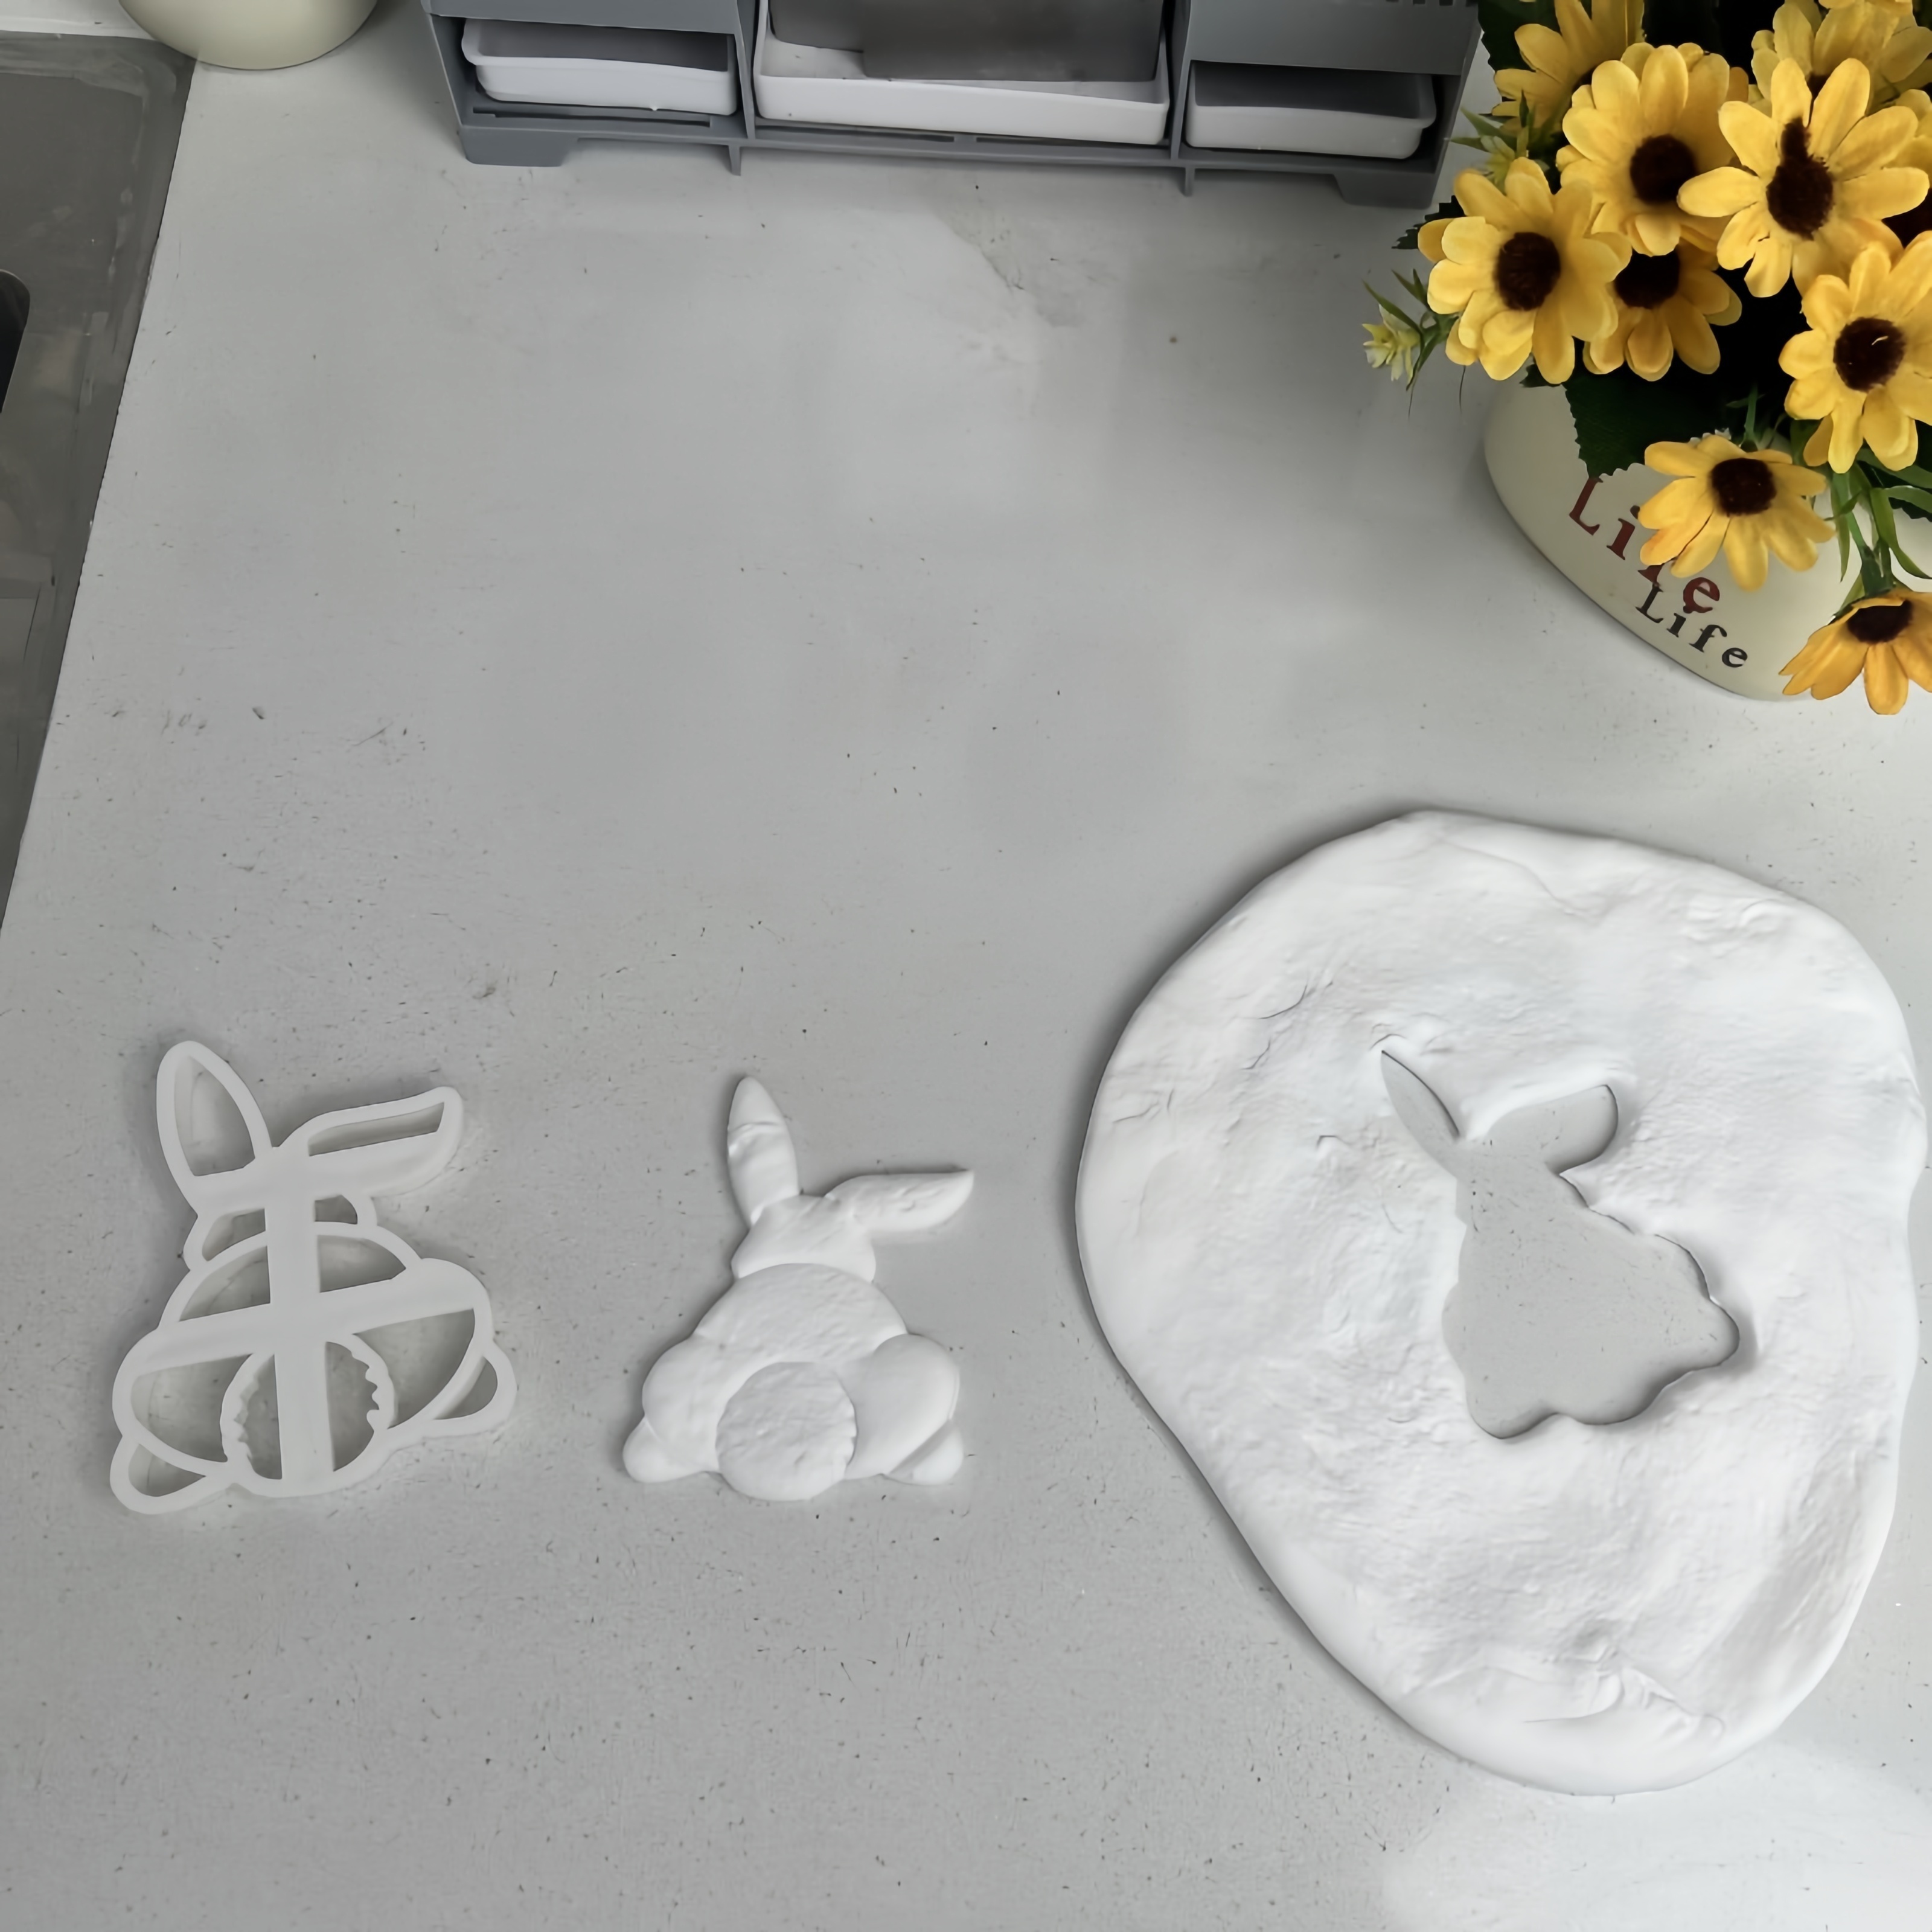 

2pcs, Bunny Rabbit Cookie Cutters, Plastic Cookie Embosser, Pastry Cutter Set, Biscuit Molds, Baking Tools, Kitchen Accessories